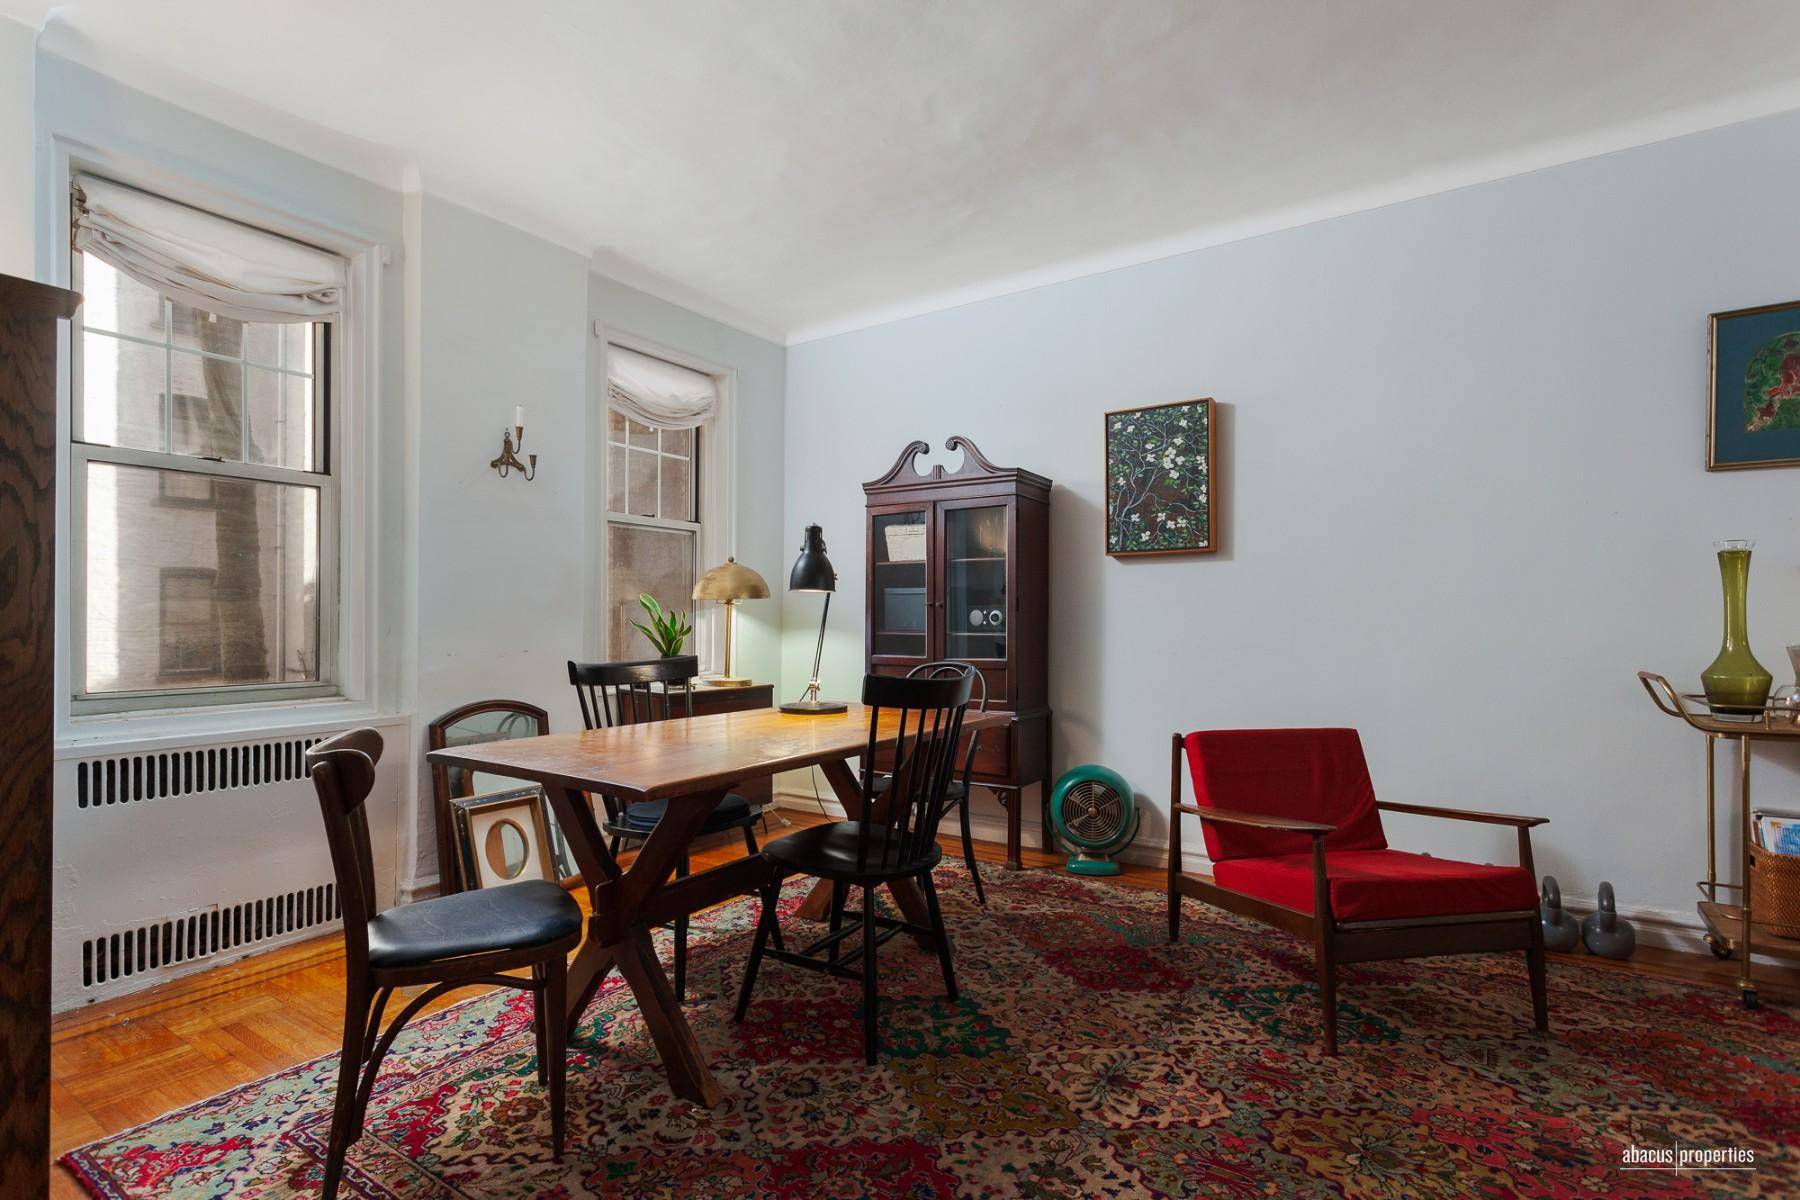 This spacious 1 bedroom has tons of prewar charm and an updated kitchen and bath.